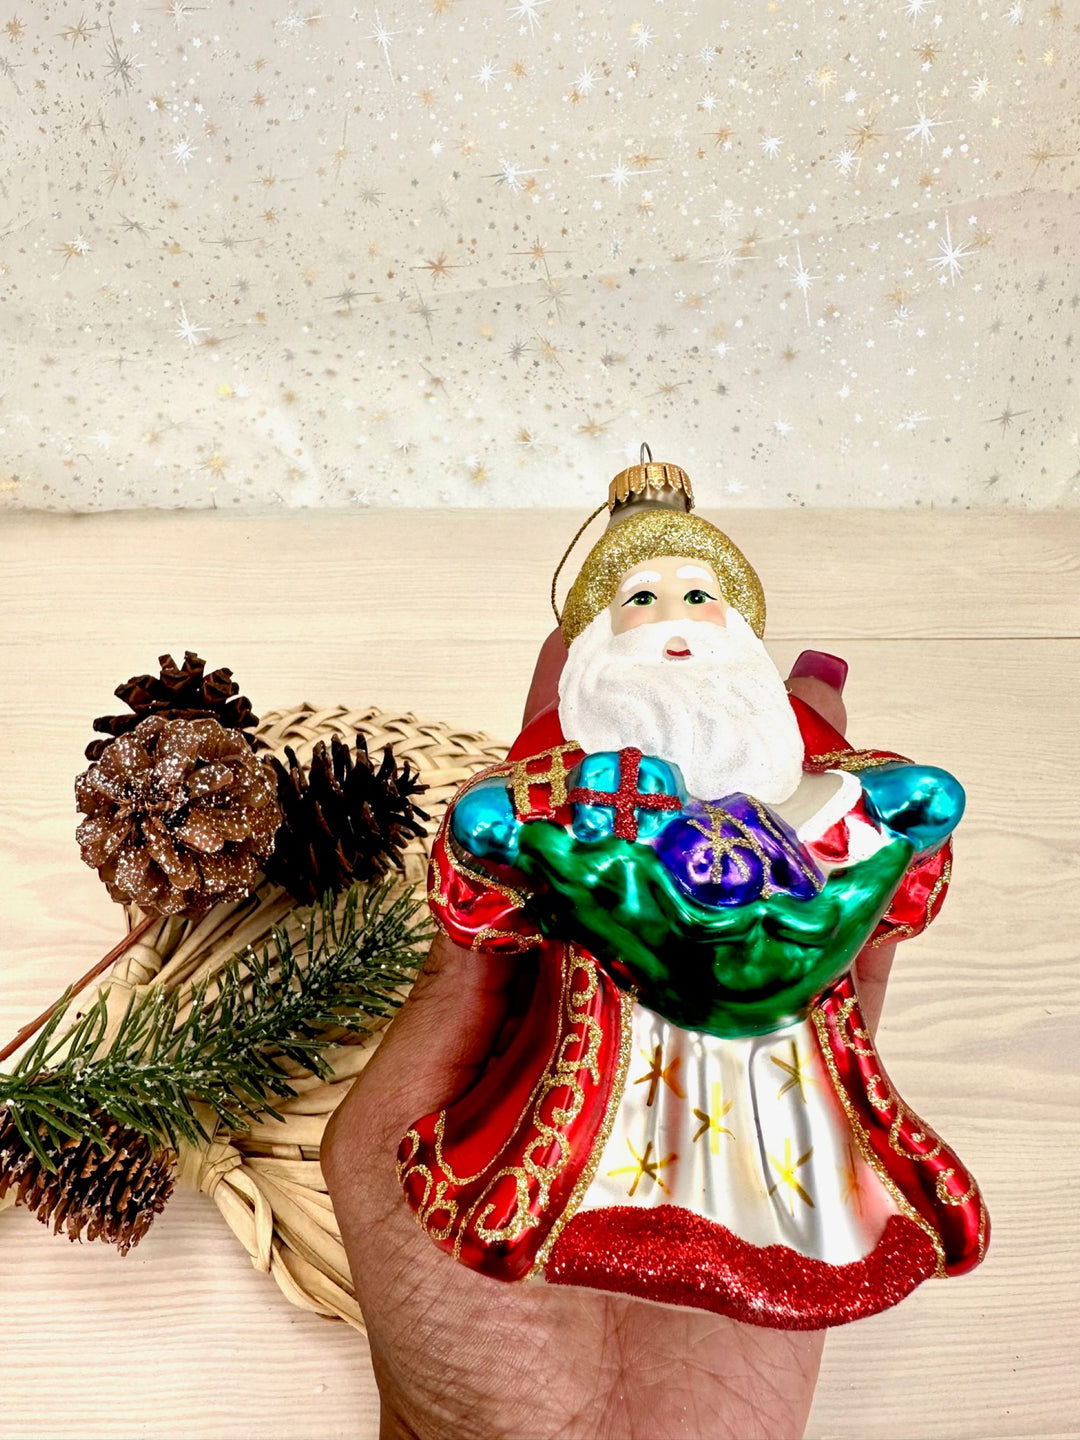 Christmas By Krebs Blown Glass  Collectible Tree Ornaments  (5" Santa with White Coat and Presents)